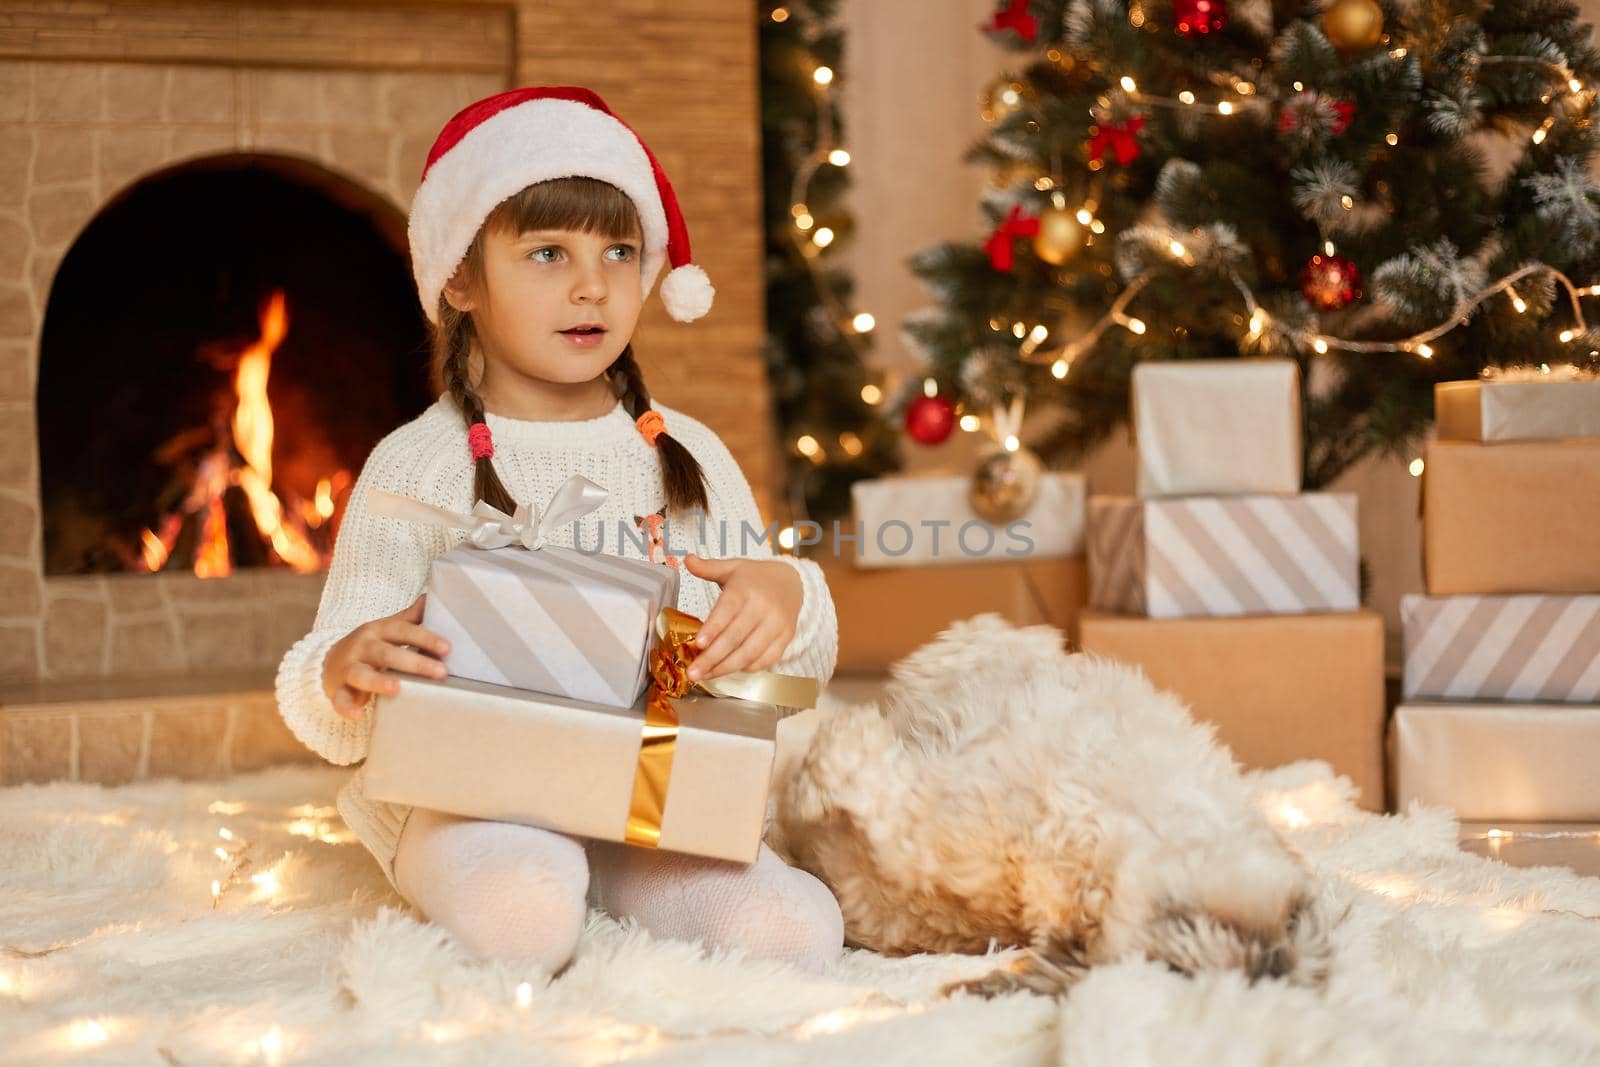 Astonish little girl with gift boxes sitting on floor and looking away, wearing white jumper and red santa claus hat, having two pigtails, posing near xmas tree and fireplace on soft carpet.